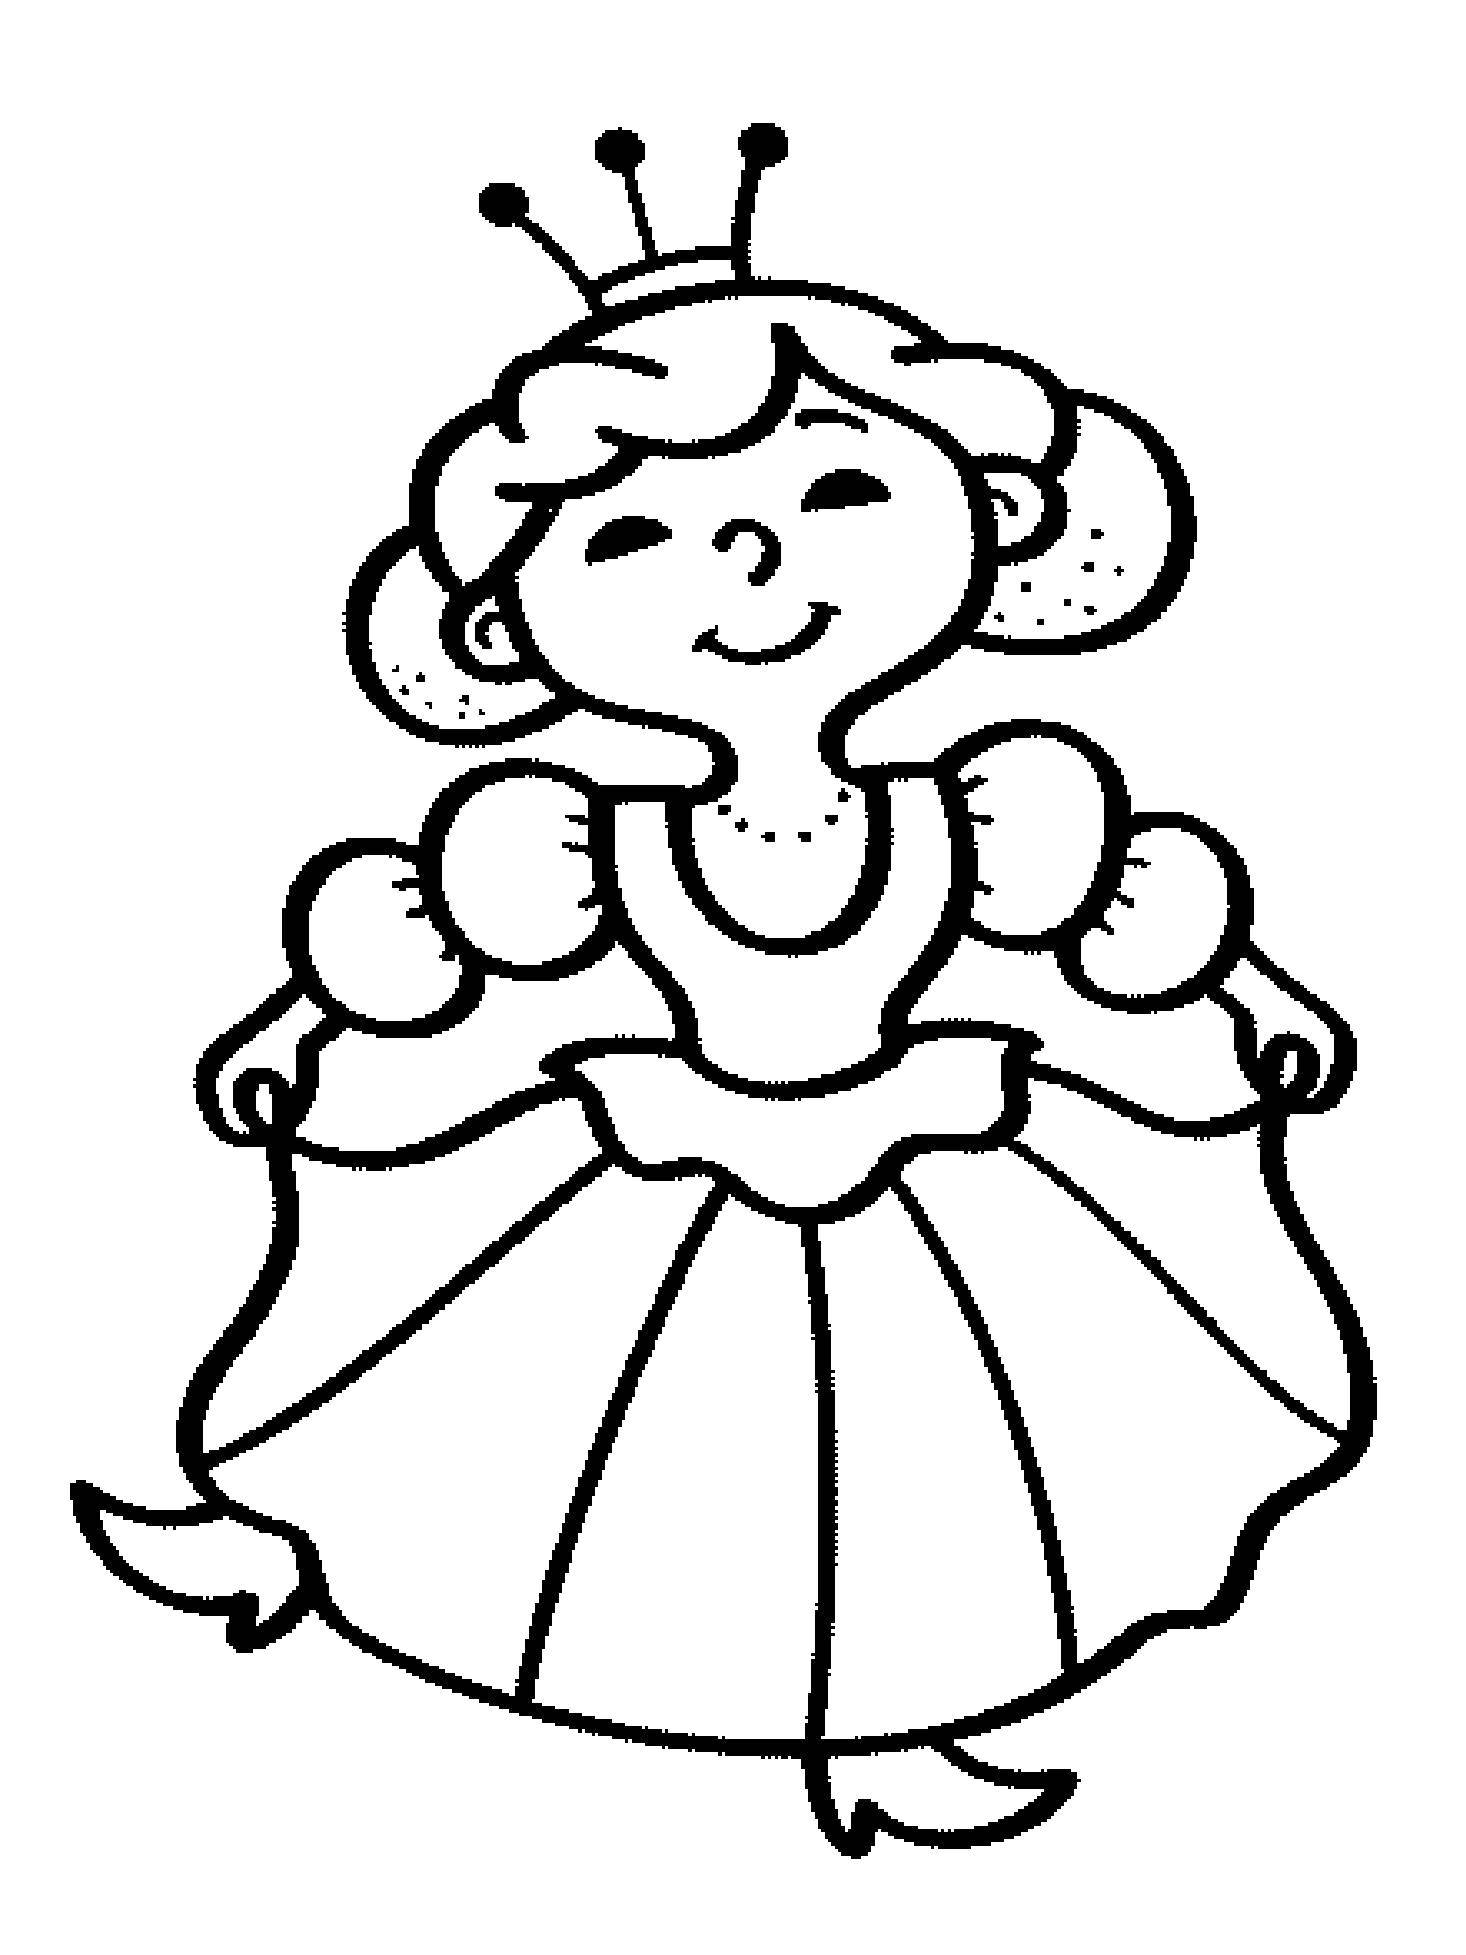 Coloring Princess. Category The Queen. Tags:  Princess dress.